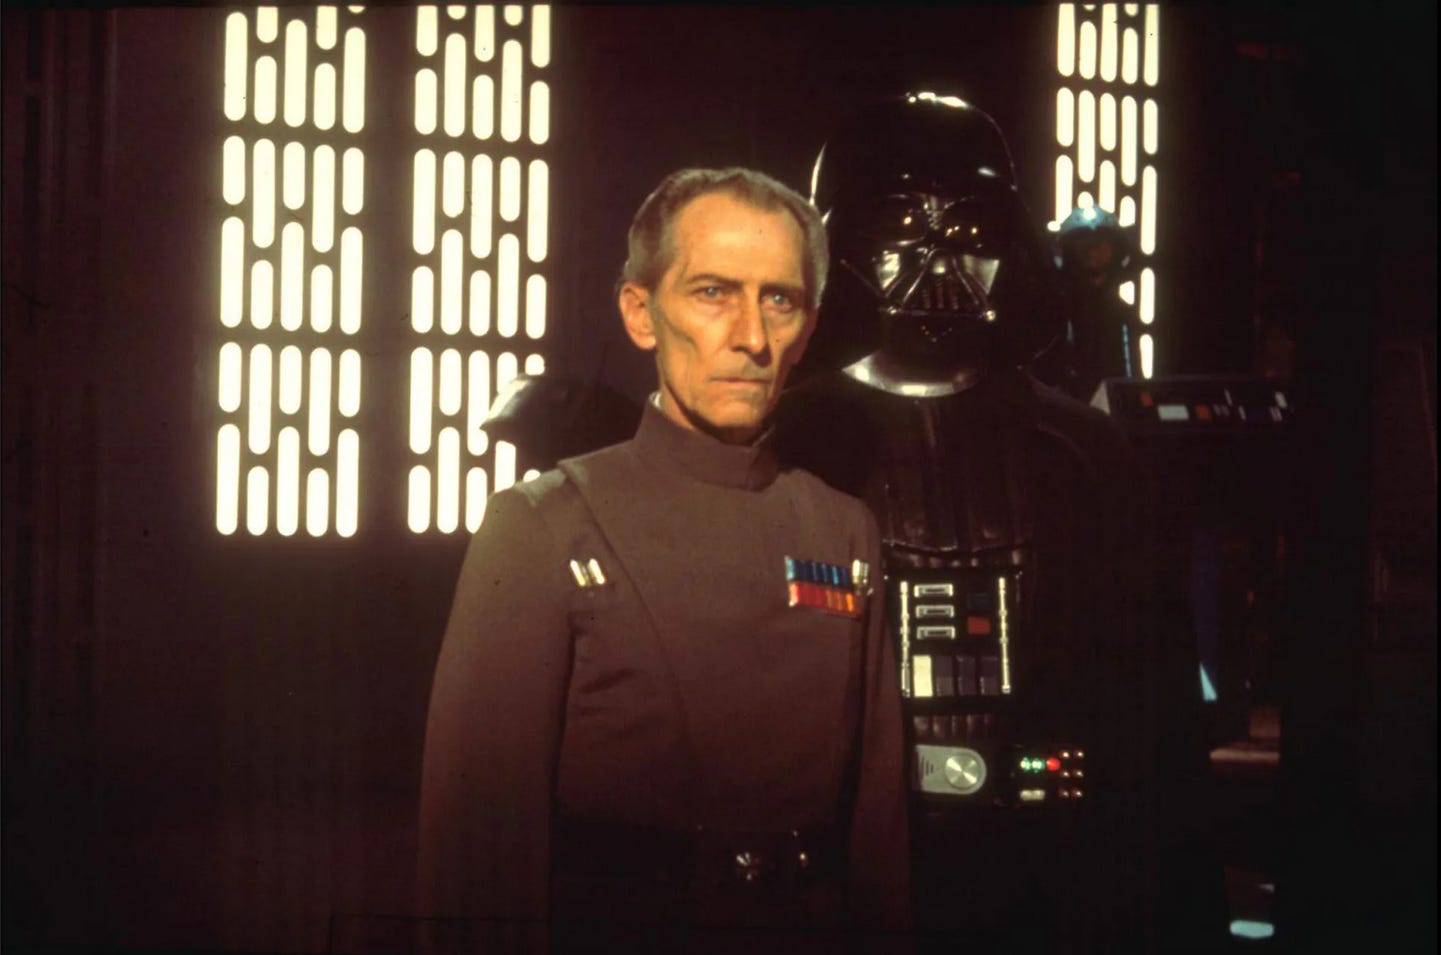 Moff Tarkin and Darth Vader stand in the Death Star control room from Star Wars